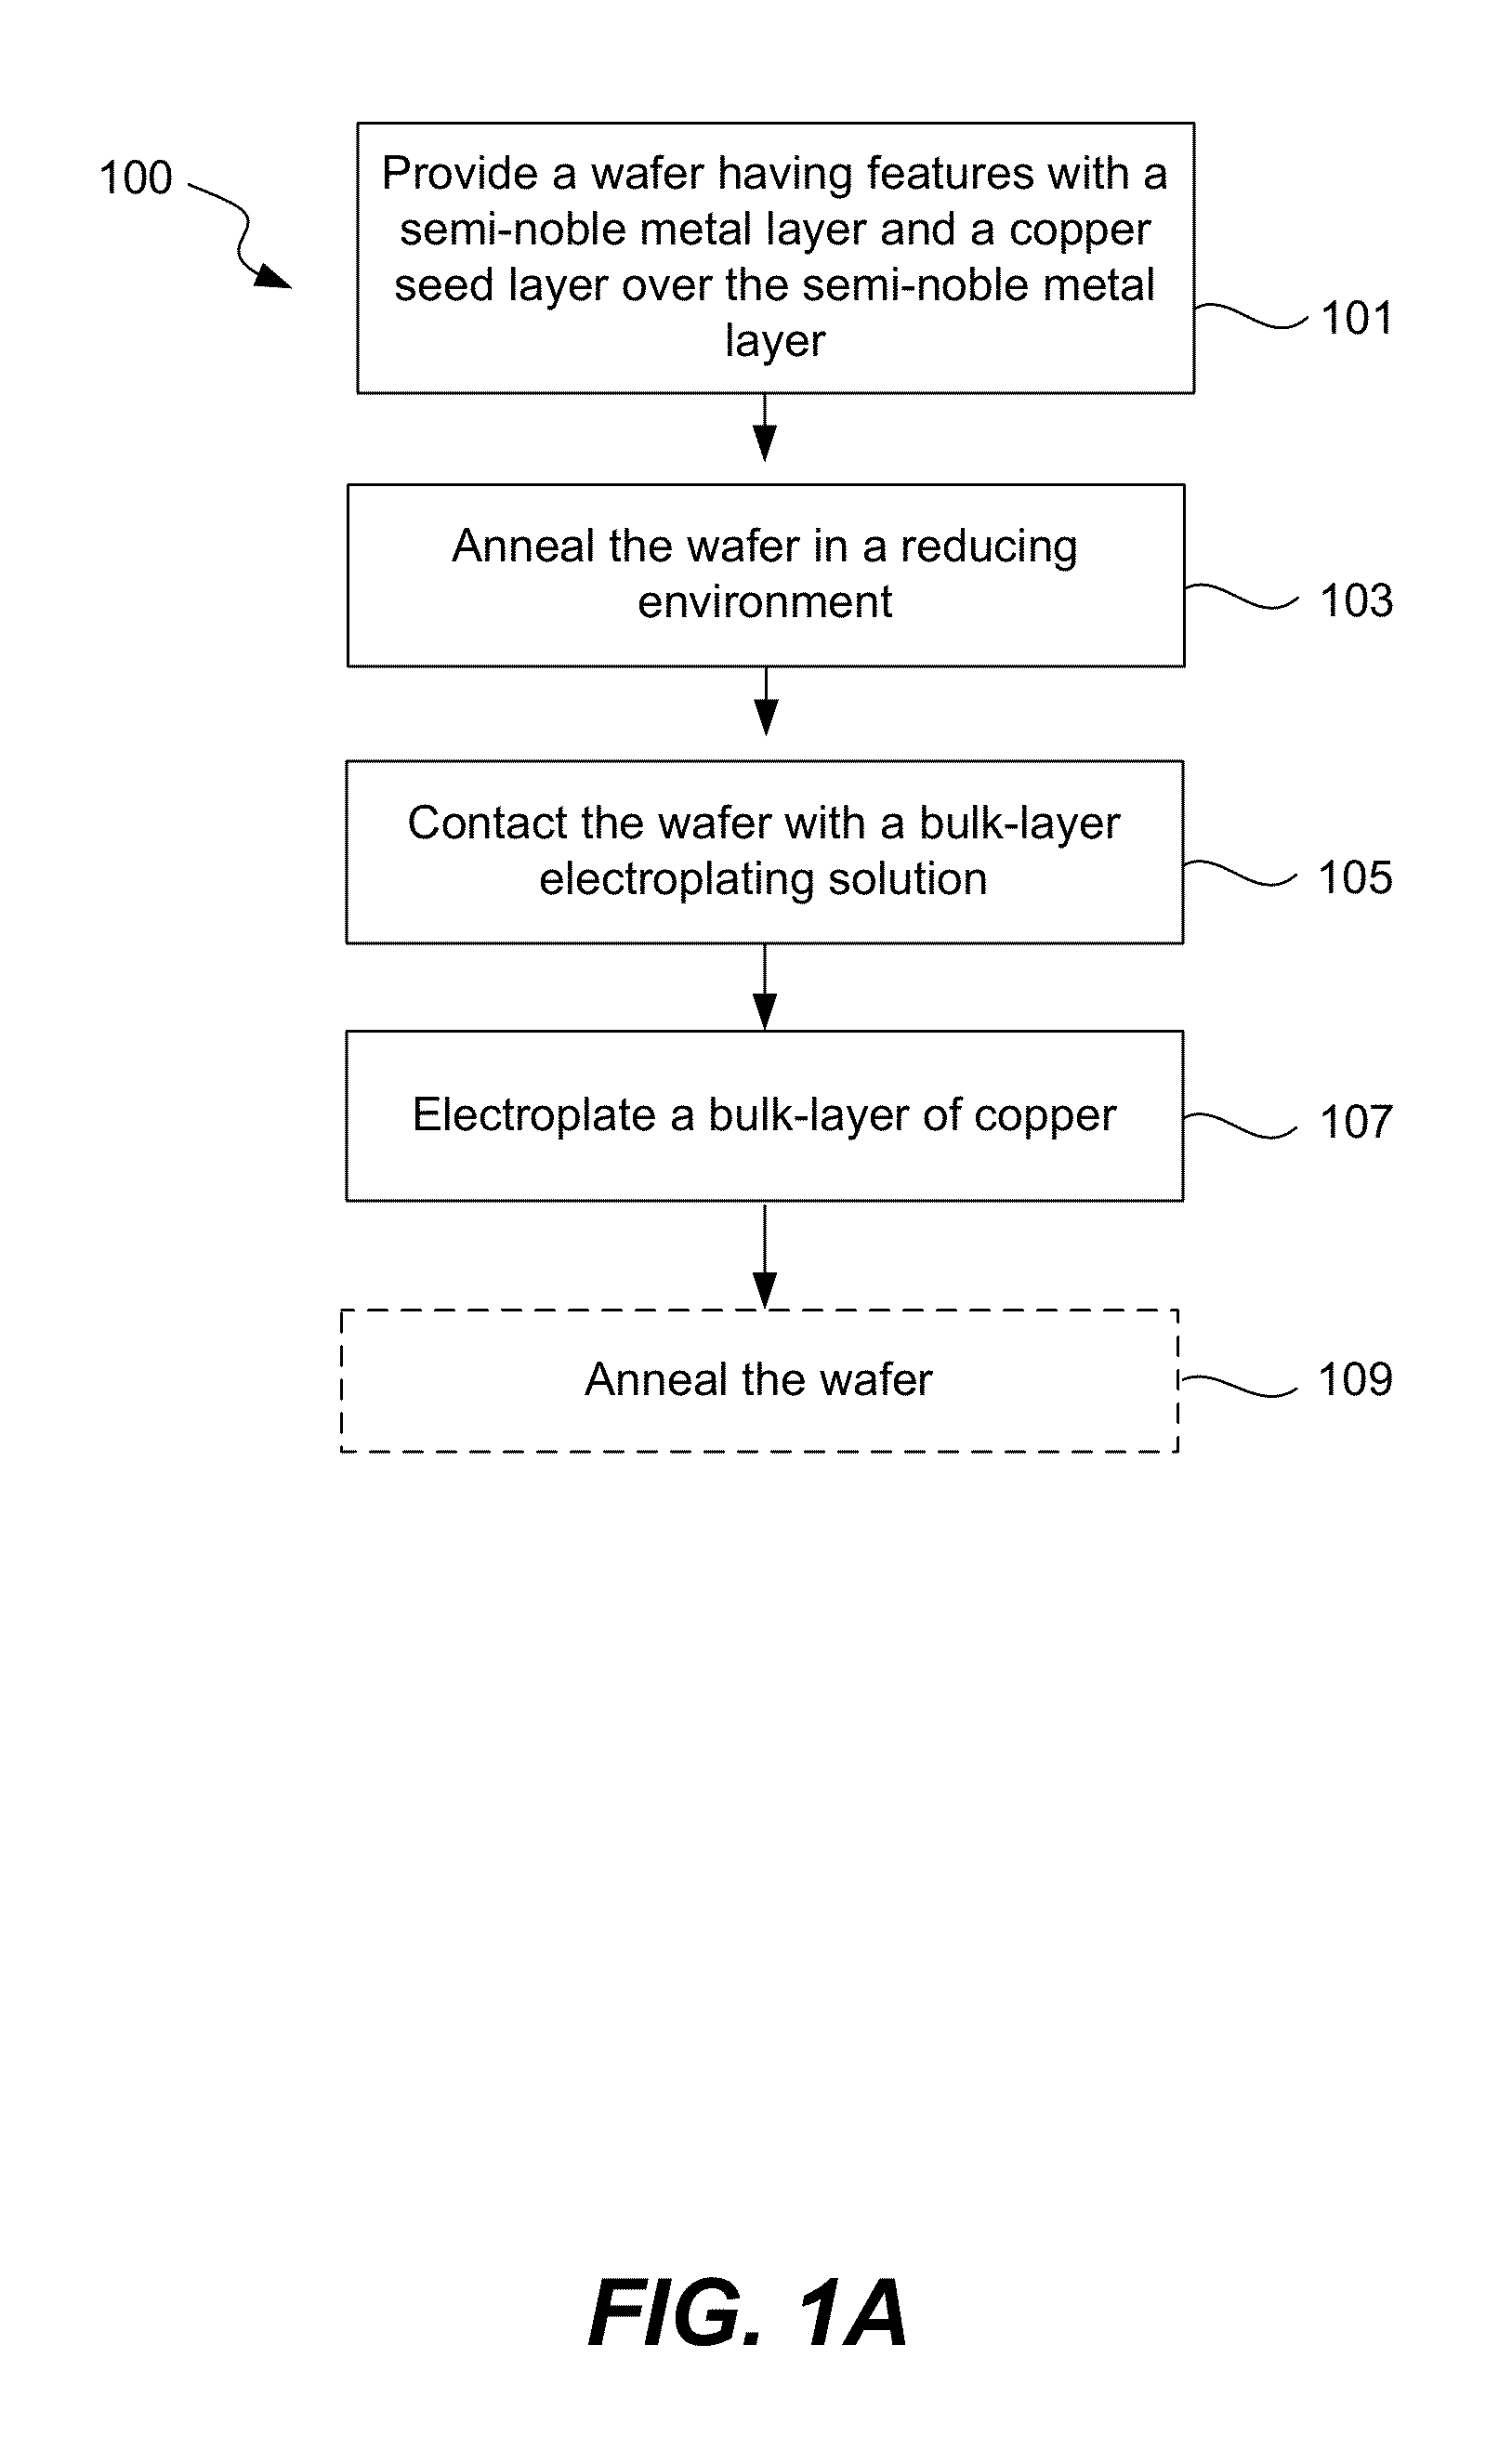 Copper electroplating process for uniform across wafer deposition and void free filling on semi-noble metal coated wafers